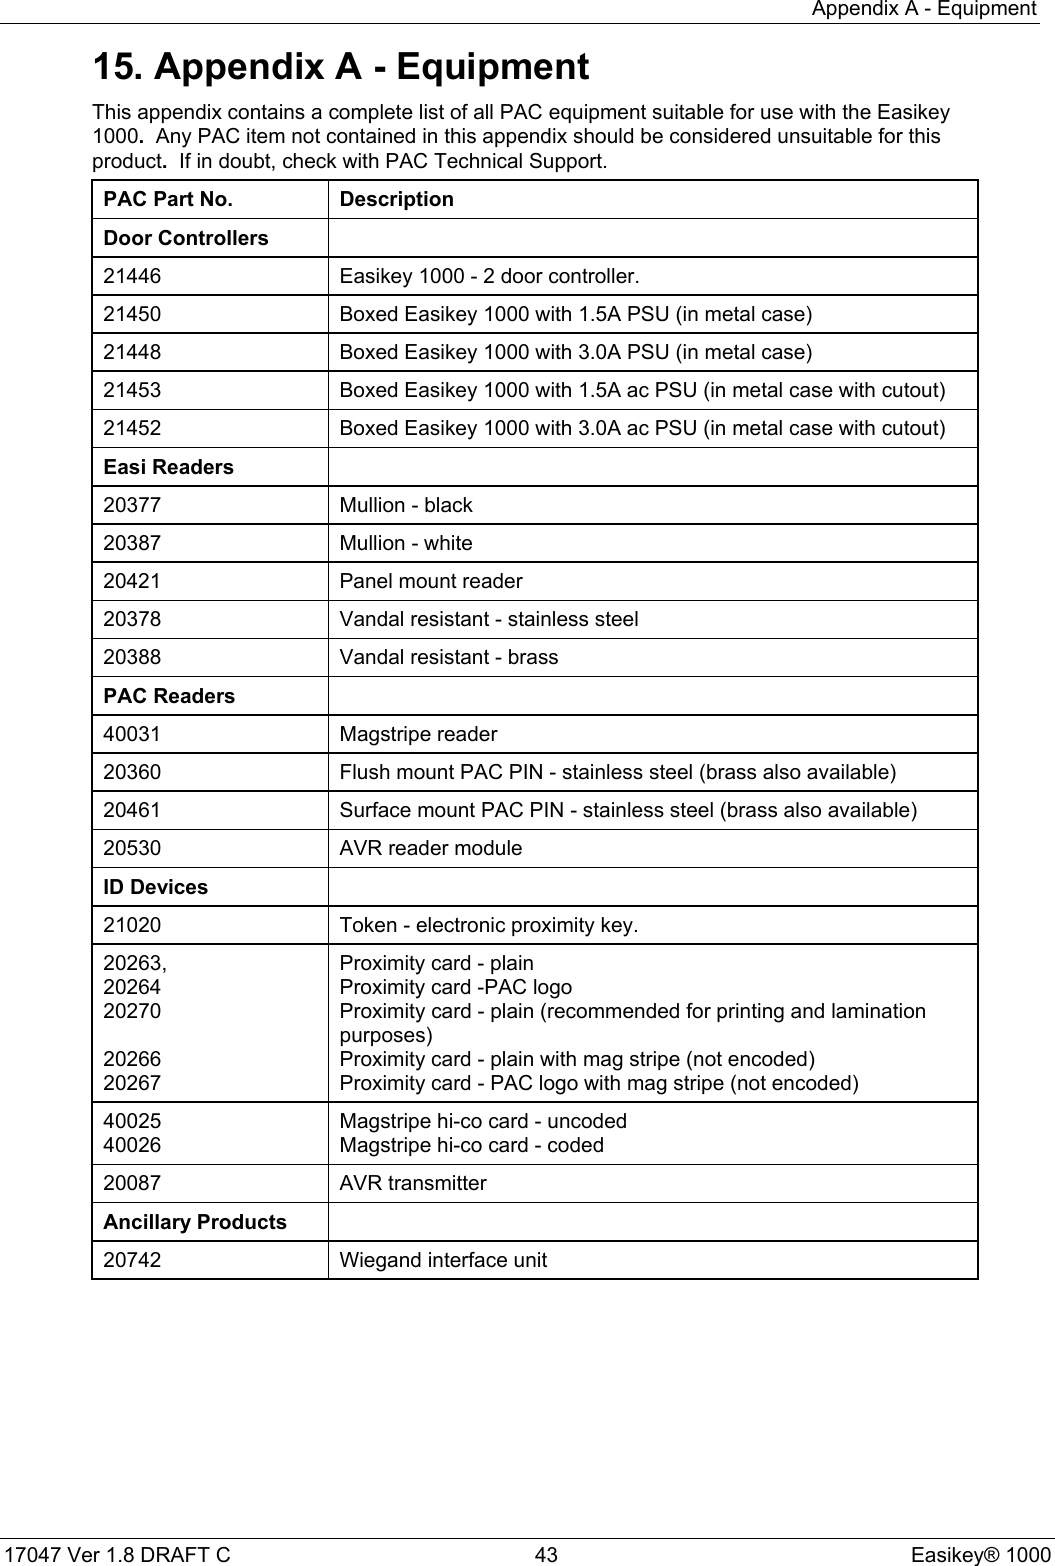 Appendix A - Equipment17047 Ver 1.8 DRAFT C  43 Easikey® 100015. Appendix A - EquipmentThis appendix contains a complete list of all PAC equipment suitable for use with the Easikey1000.  Any PAC item not contained in this appendix should be considered unsuitable for thisproduct.  If in doubt, check with PAC Technical Support.PAC Part No. DescriptionDoor Controllers21446 Easikey 1000 - 2 door controller.21450 Boxed Easikey 1000 with 1.5A PSU (in metal case)21448 Boxed Easikey 1000 with 3.0A PSU (in metal case)21453 Boxed Easikey 1000 with 1.5A ac PSU (in metal case with cutout)21452 Boxed Easikey 1000 with 3.0A ac PSU (in metal case with cutout)Easi Readers20377 Mullion - black20387 Mullion - white20421 Panel mount reader20378 Vandal resistant - stainless steel20388 Vandal resistant - brassPAC Readers40031 Magstripe reader20360 Flush mount PAC PIN - stainless steel (brass also available)20461 Surface mount PAC PIN - stainless steel (brass also available)20530 AVR reader moduleID Devices21020 Token - electronic proximity key.20263,20264202702026620267Proximity card - plainProximity card -PAC logoProximity card - plain (recommended for printing and laminationpurposes)Proximity card - plain with mag stripe (not encoded)Proximity card - PAC logo with mag stripe (not encoded)4002540026Magstripe hi-co card - uncodedMagstripe hi-co card - coded20087 AVR transmitterAncillary Products20742 Wiegand interface unit